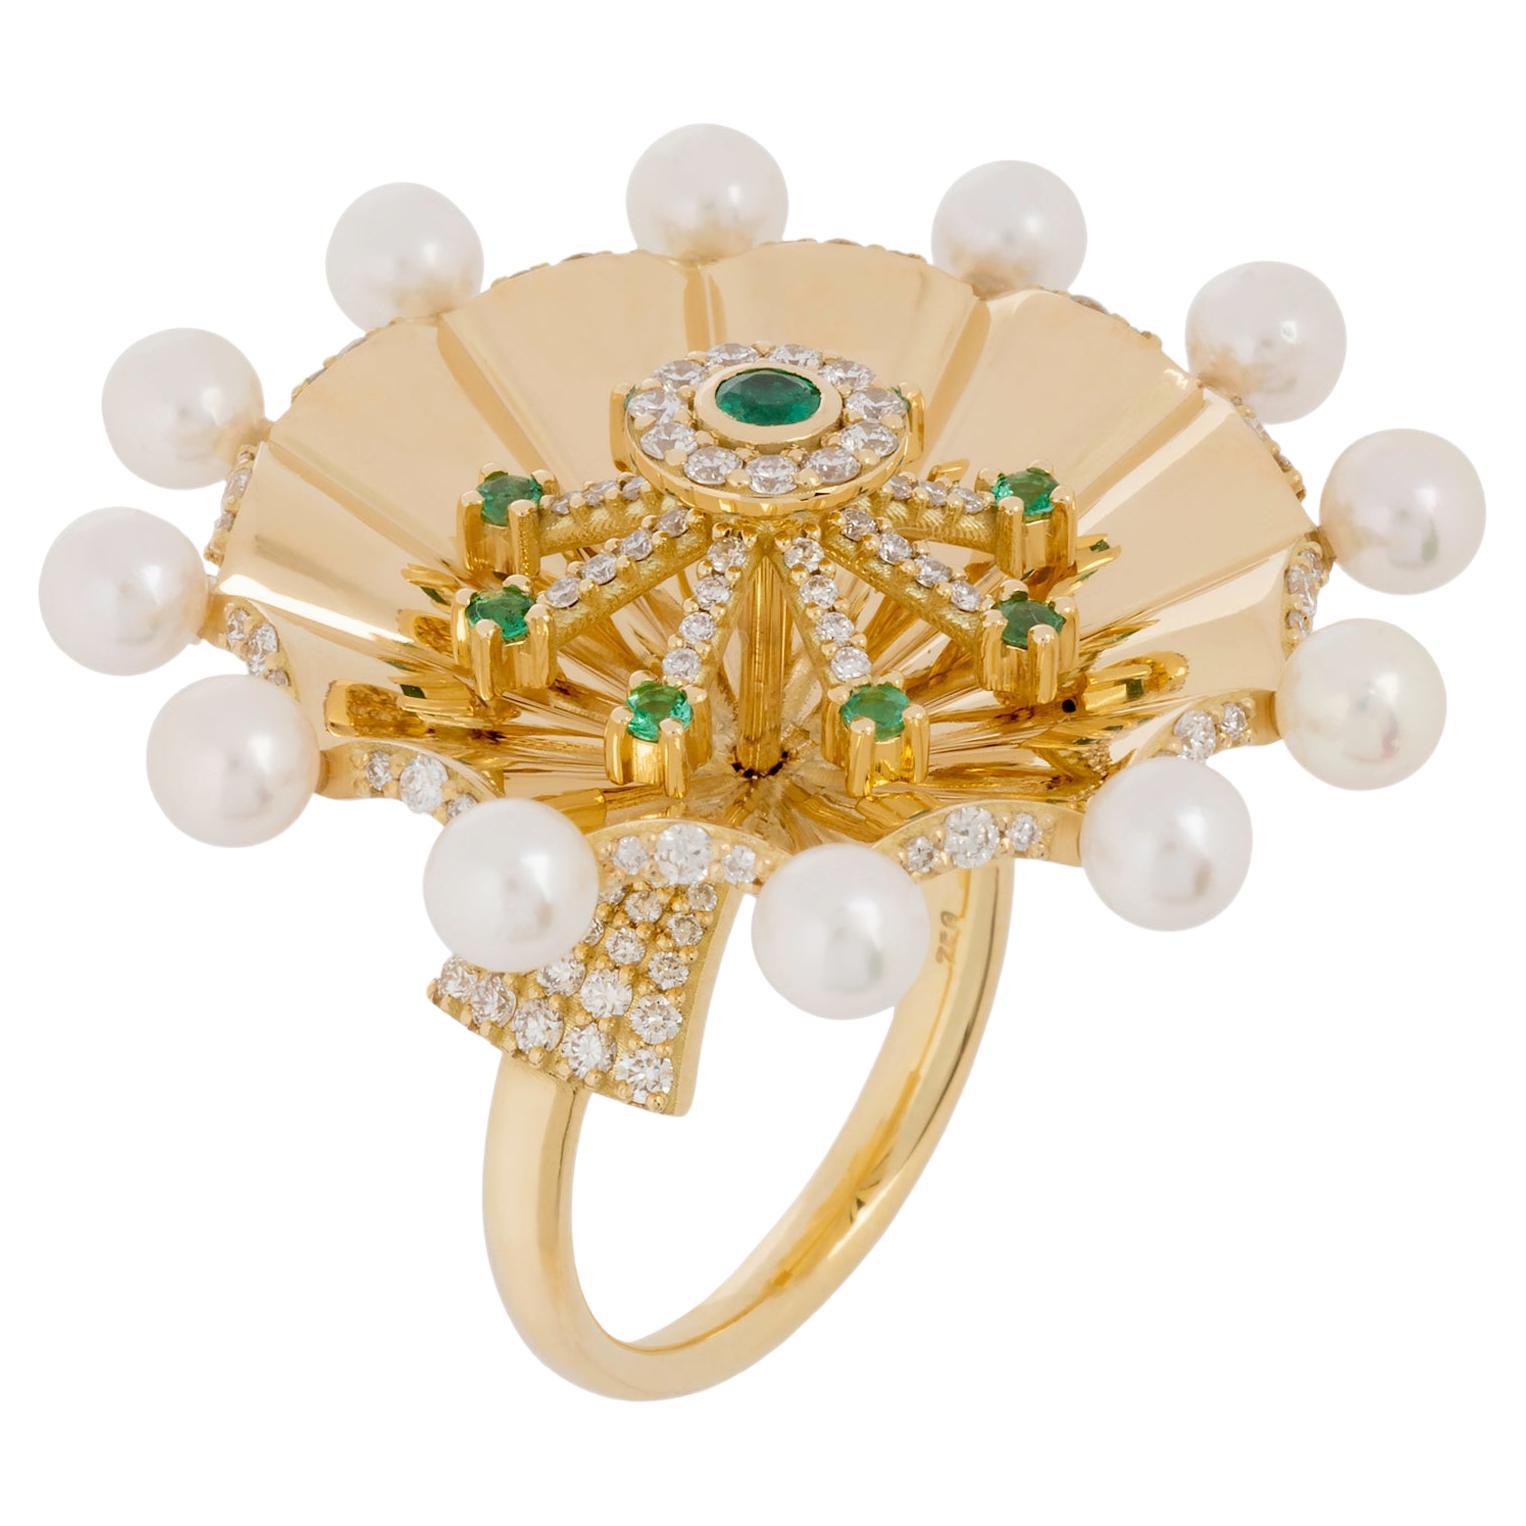 Umbrella Ring in 18 Karat Gold with Diamonds, Emeralds And Pearls